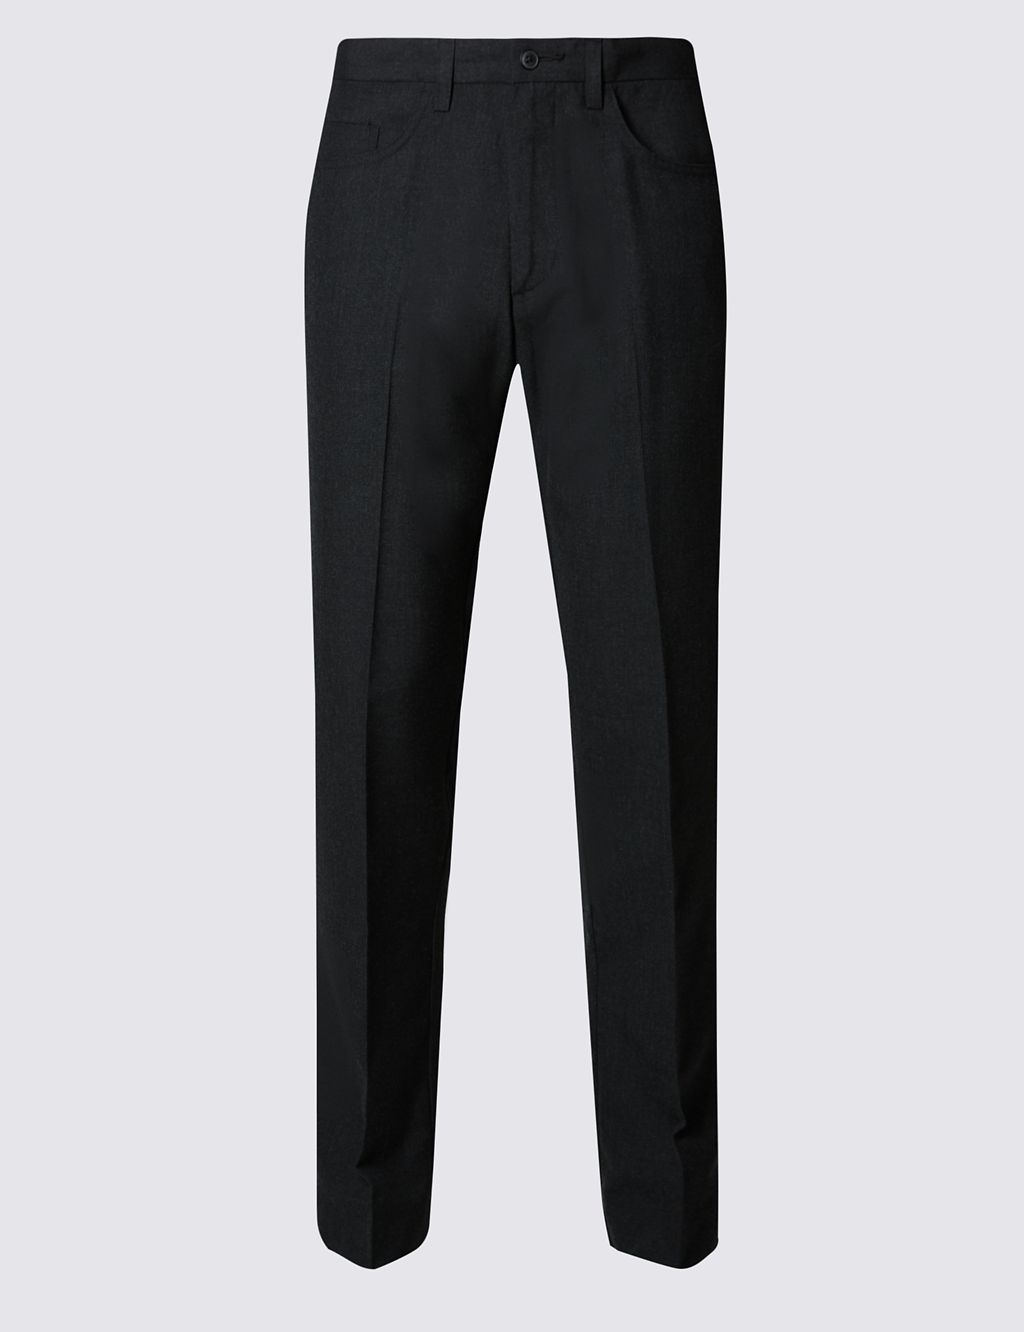 Big & Tall Flat Front Trousers 1 of 3